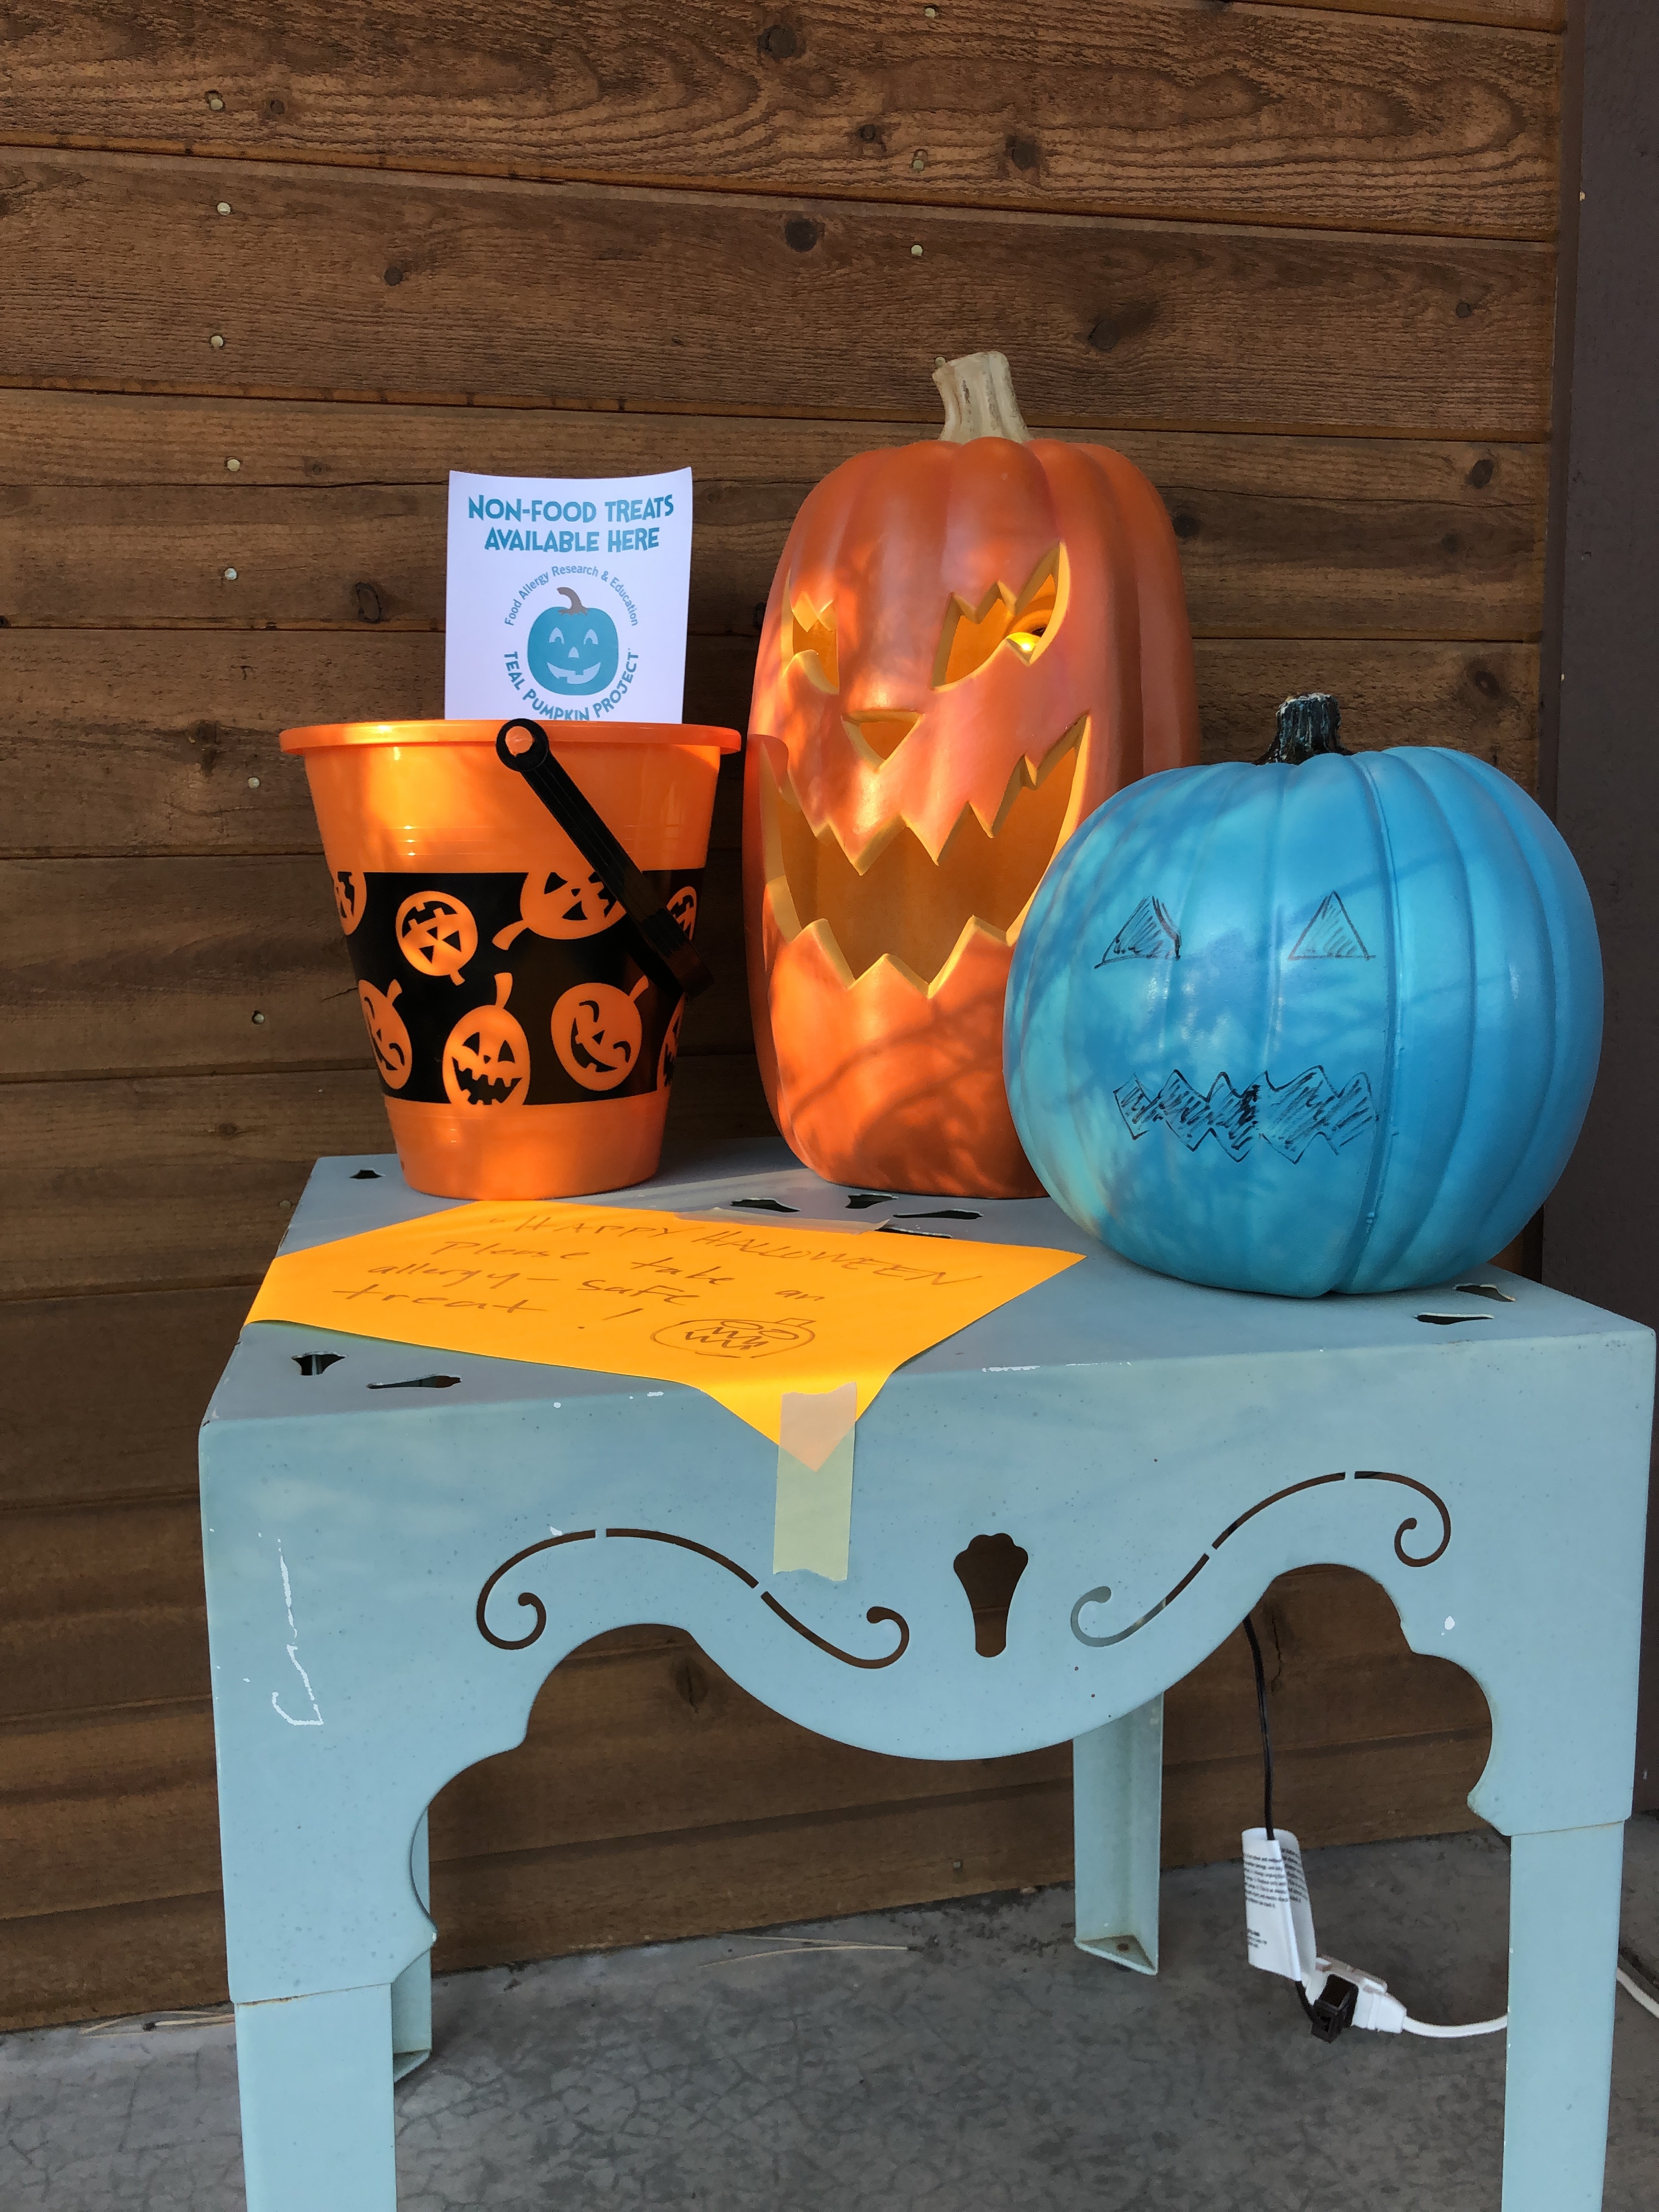 A small table with orange and teal colored pumpkins set out 